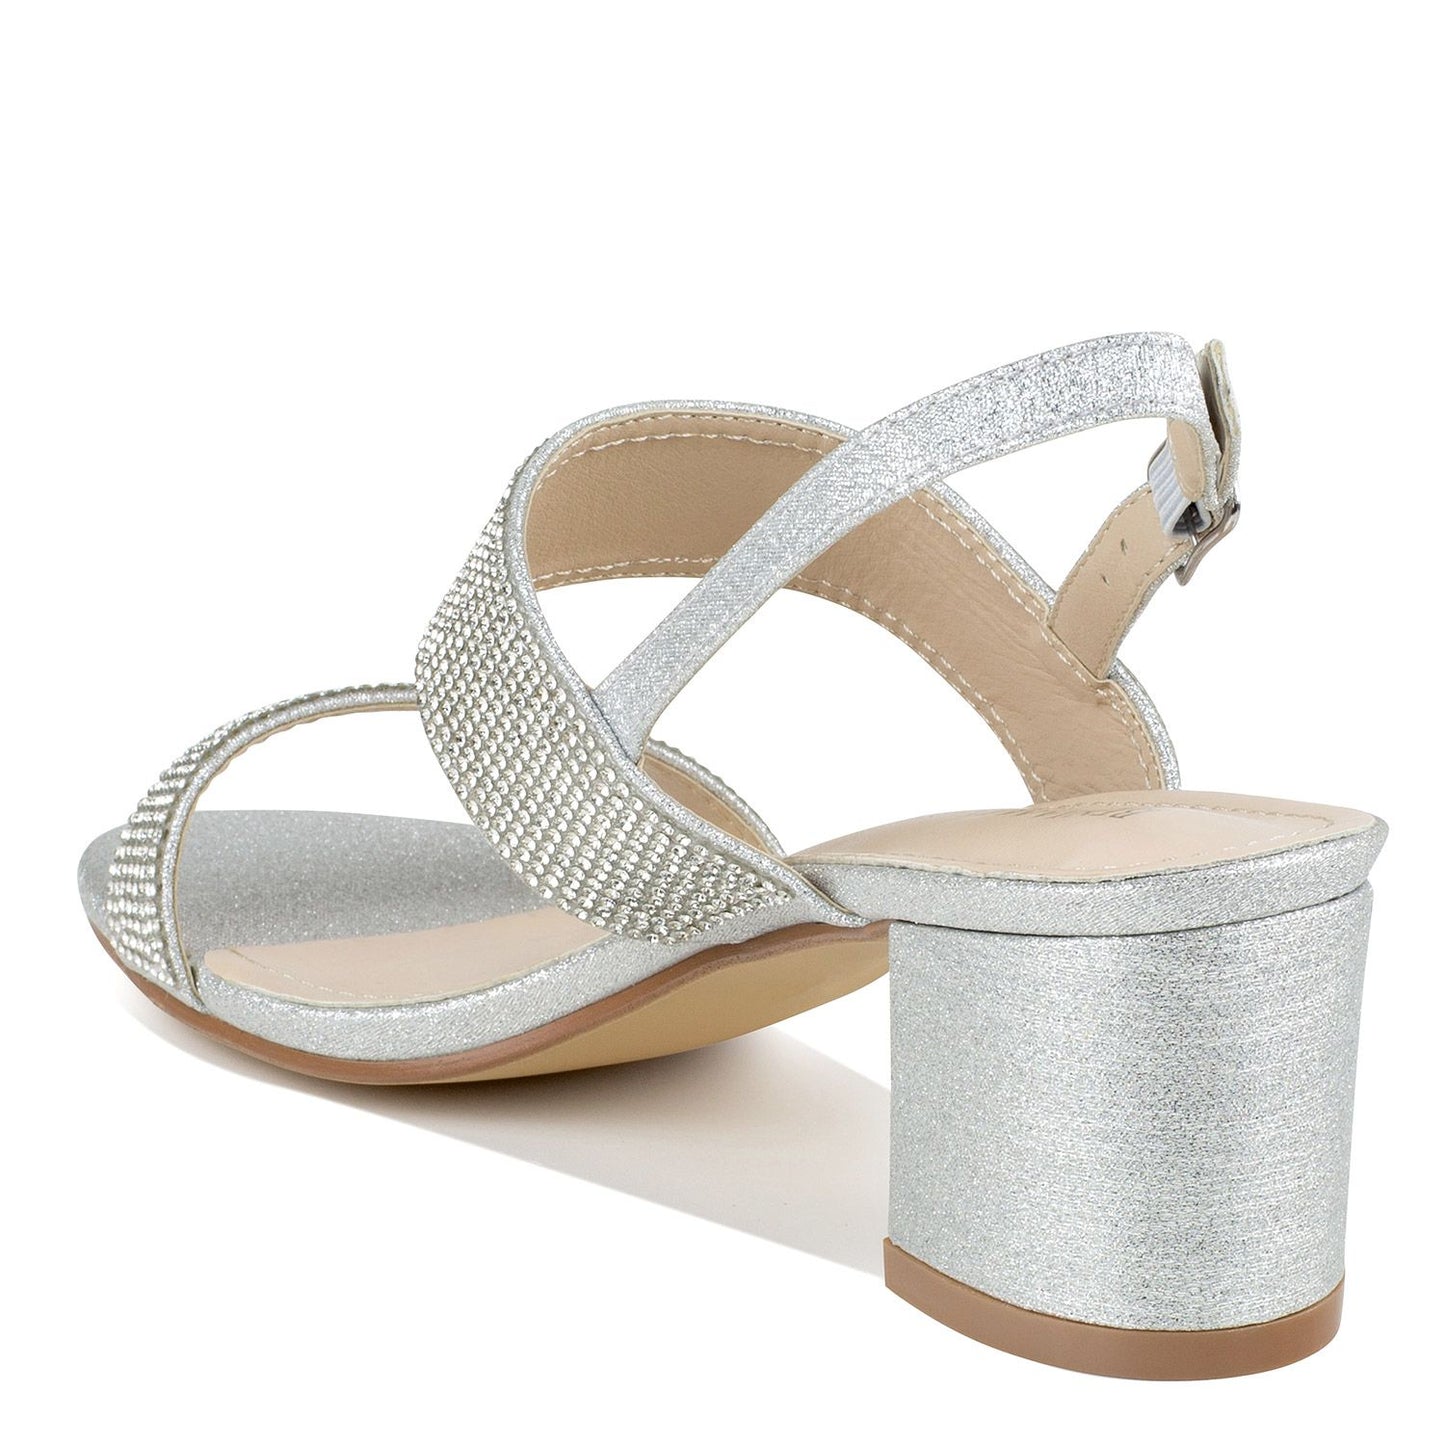 LEFT ANGLE VIEW OF SILVER GLITTER SHOE WITH WIDE BANDS AND 2 INCH BLOCK HEEL